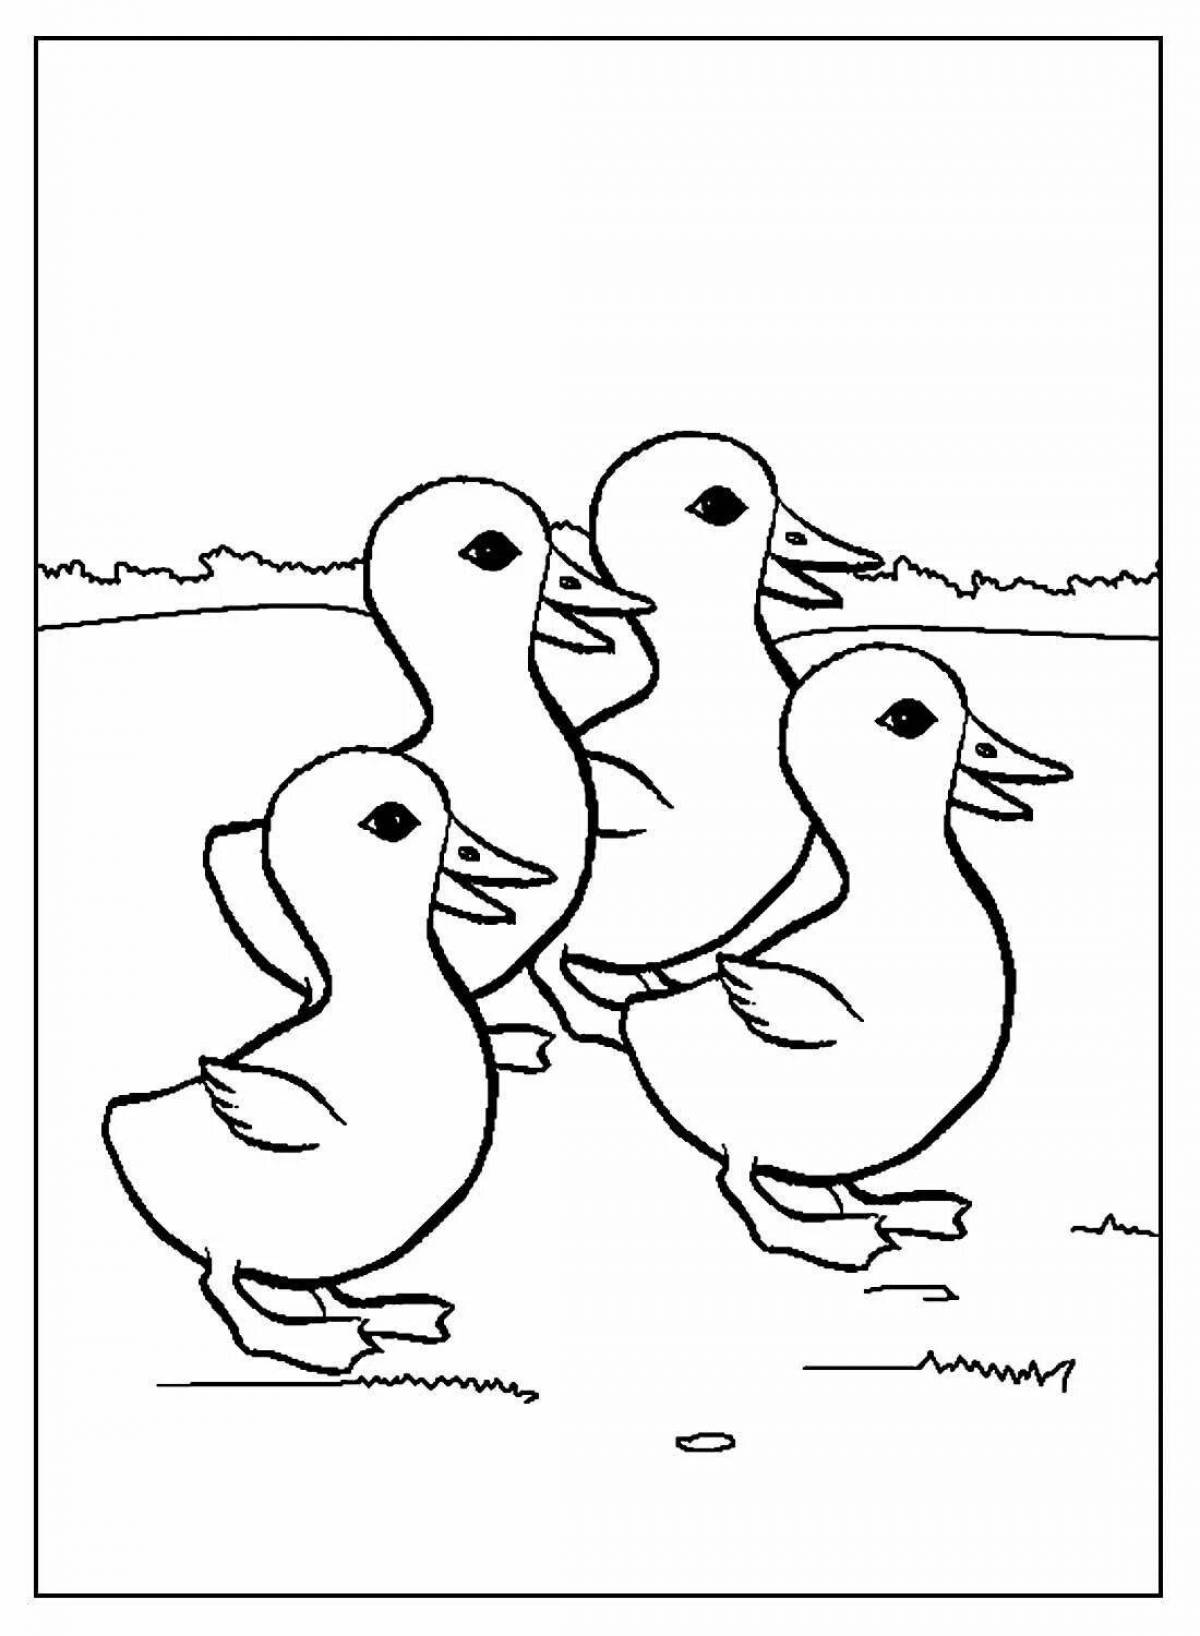 Cute duck and duckling coloring pages